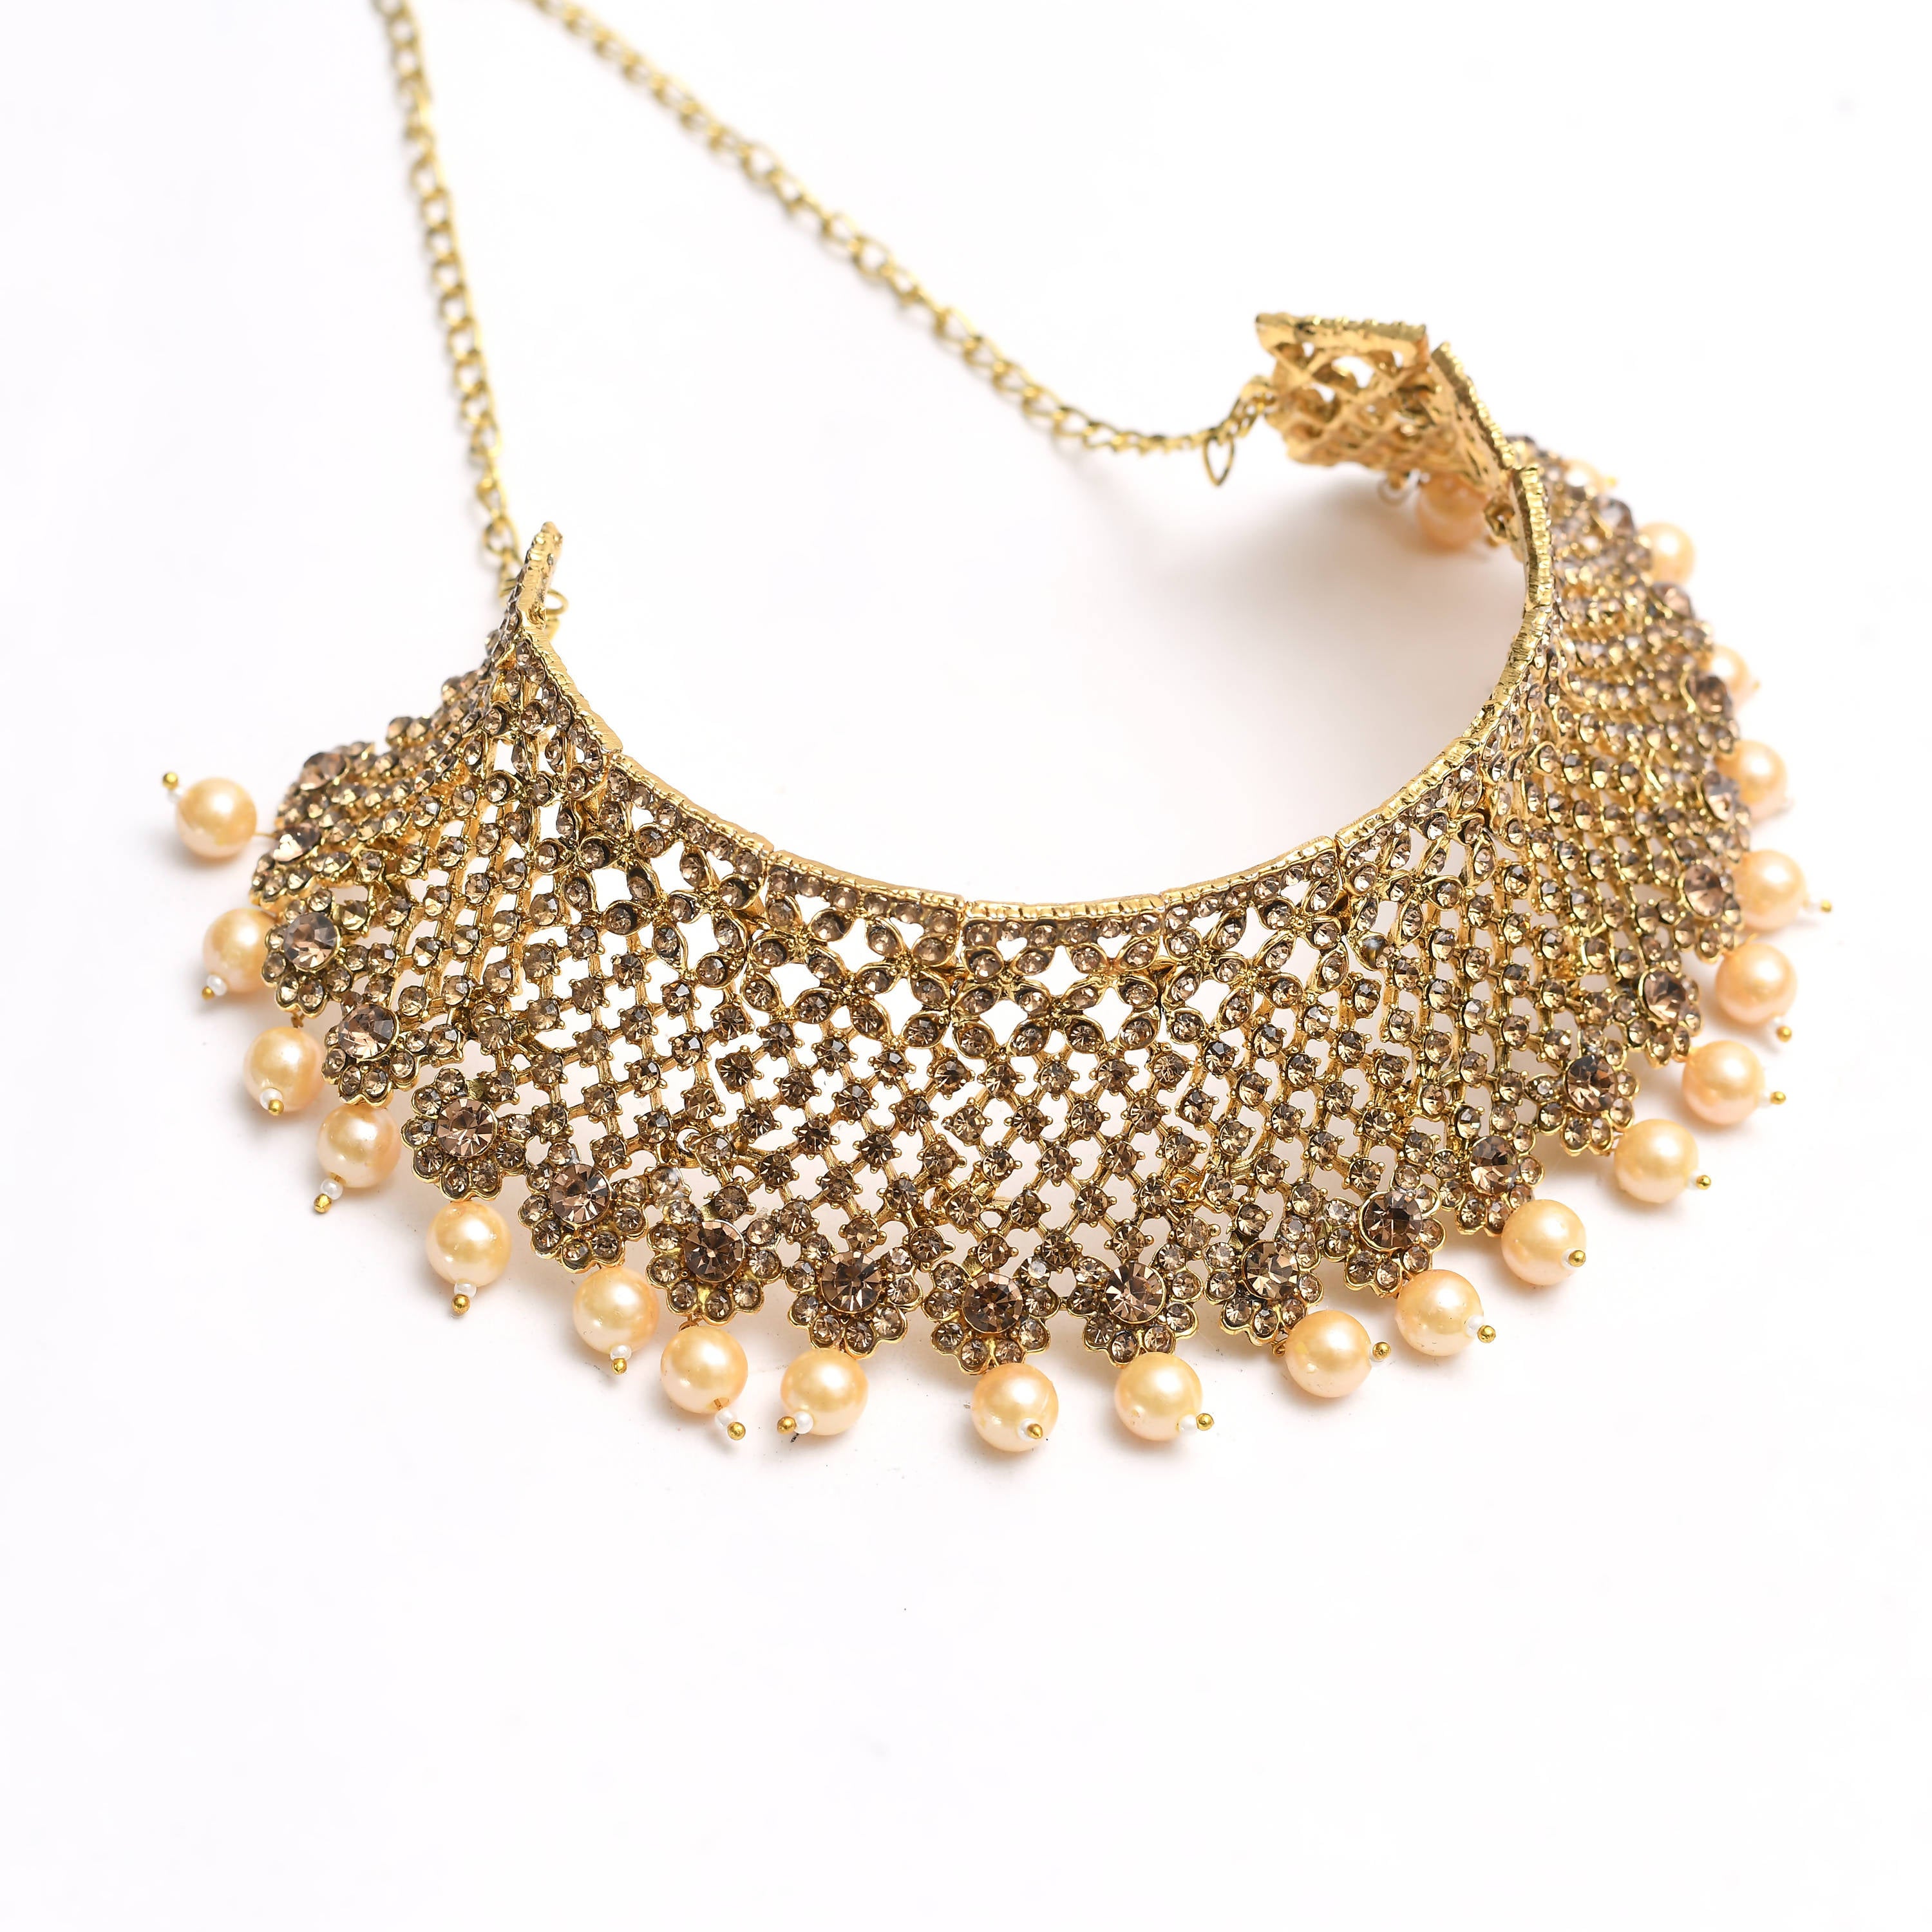 Johar Kamal Gold-Plated Golden Necklace & Pearls with Earrings ,Tikka Jkms_160